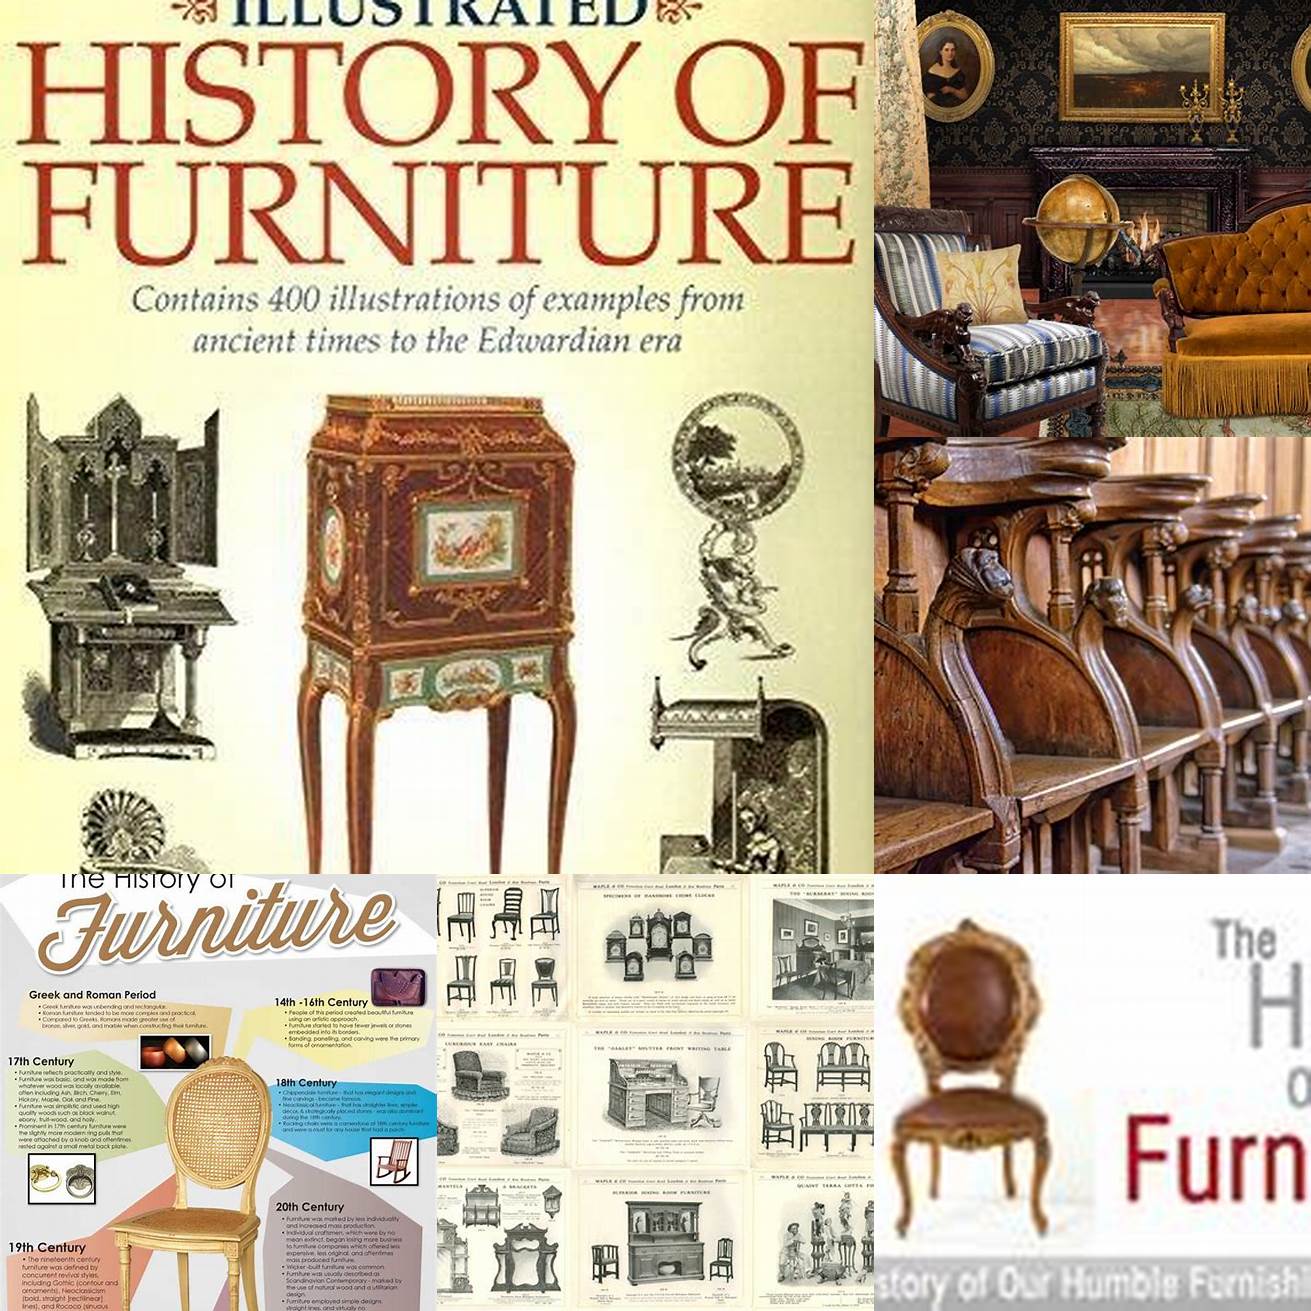 Ask for a Full History of the Furniture